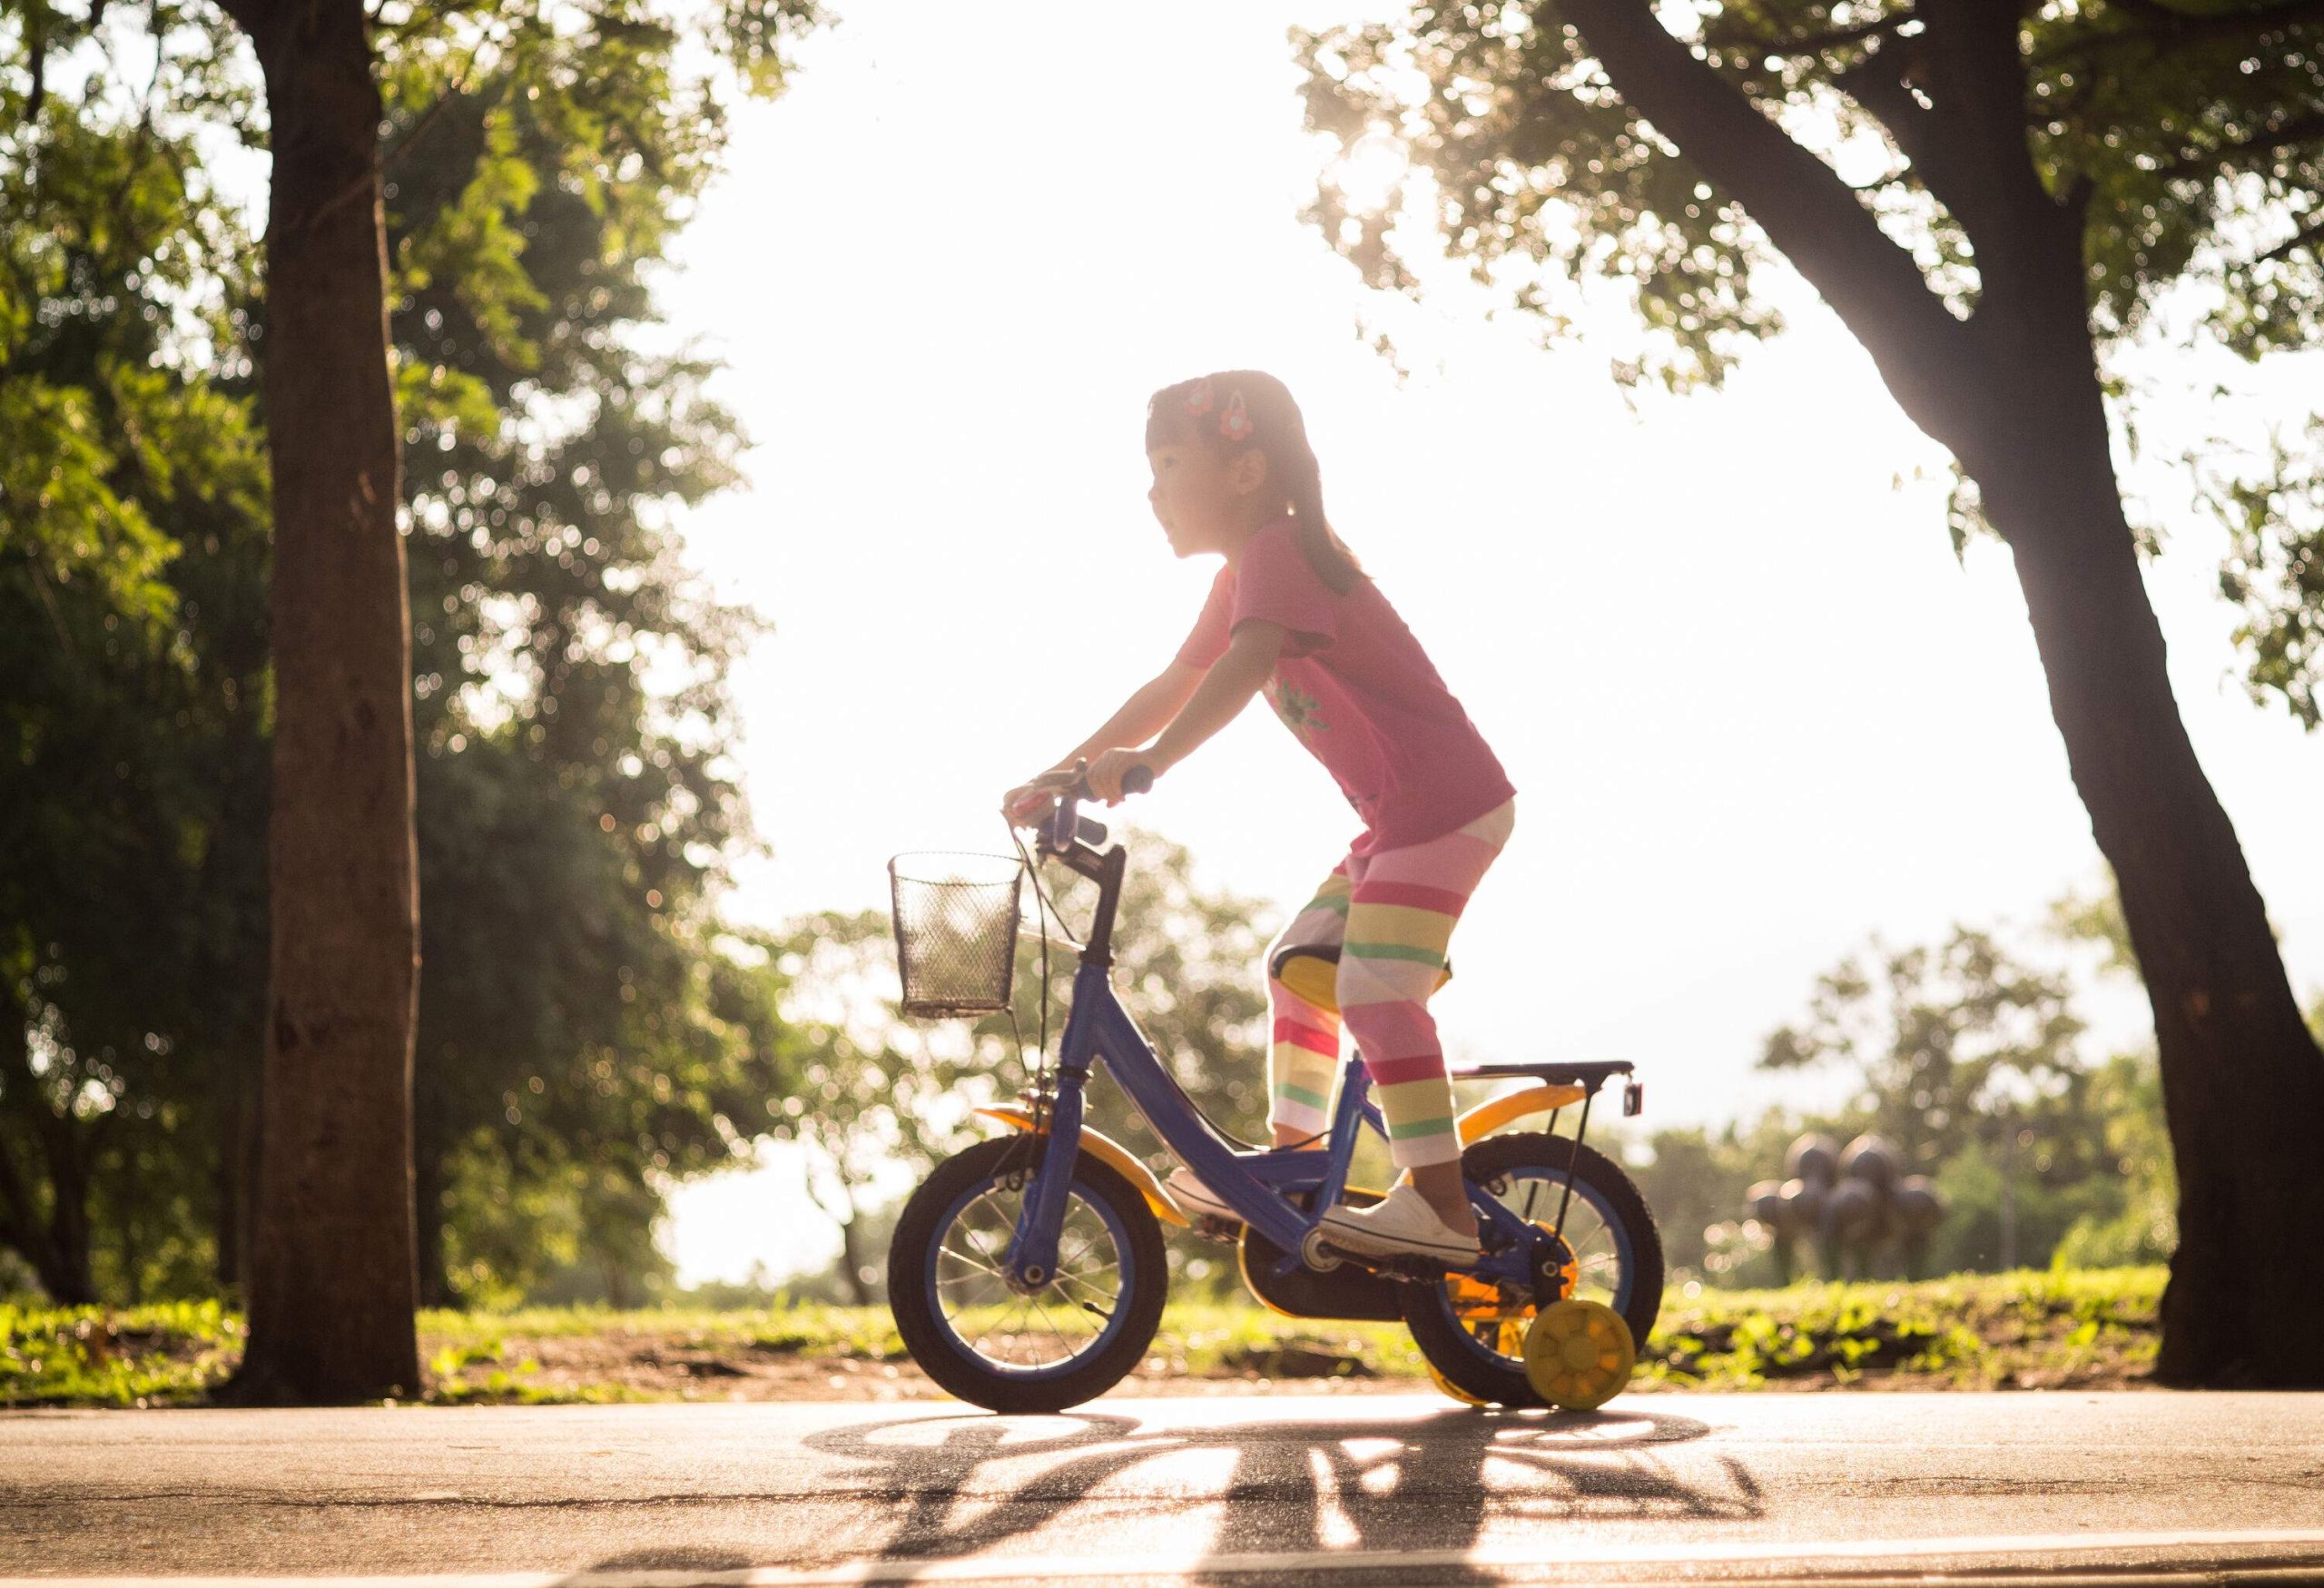 A girl rides her tiny bike on a sunlit asphalt road lined with tall trees.